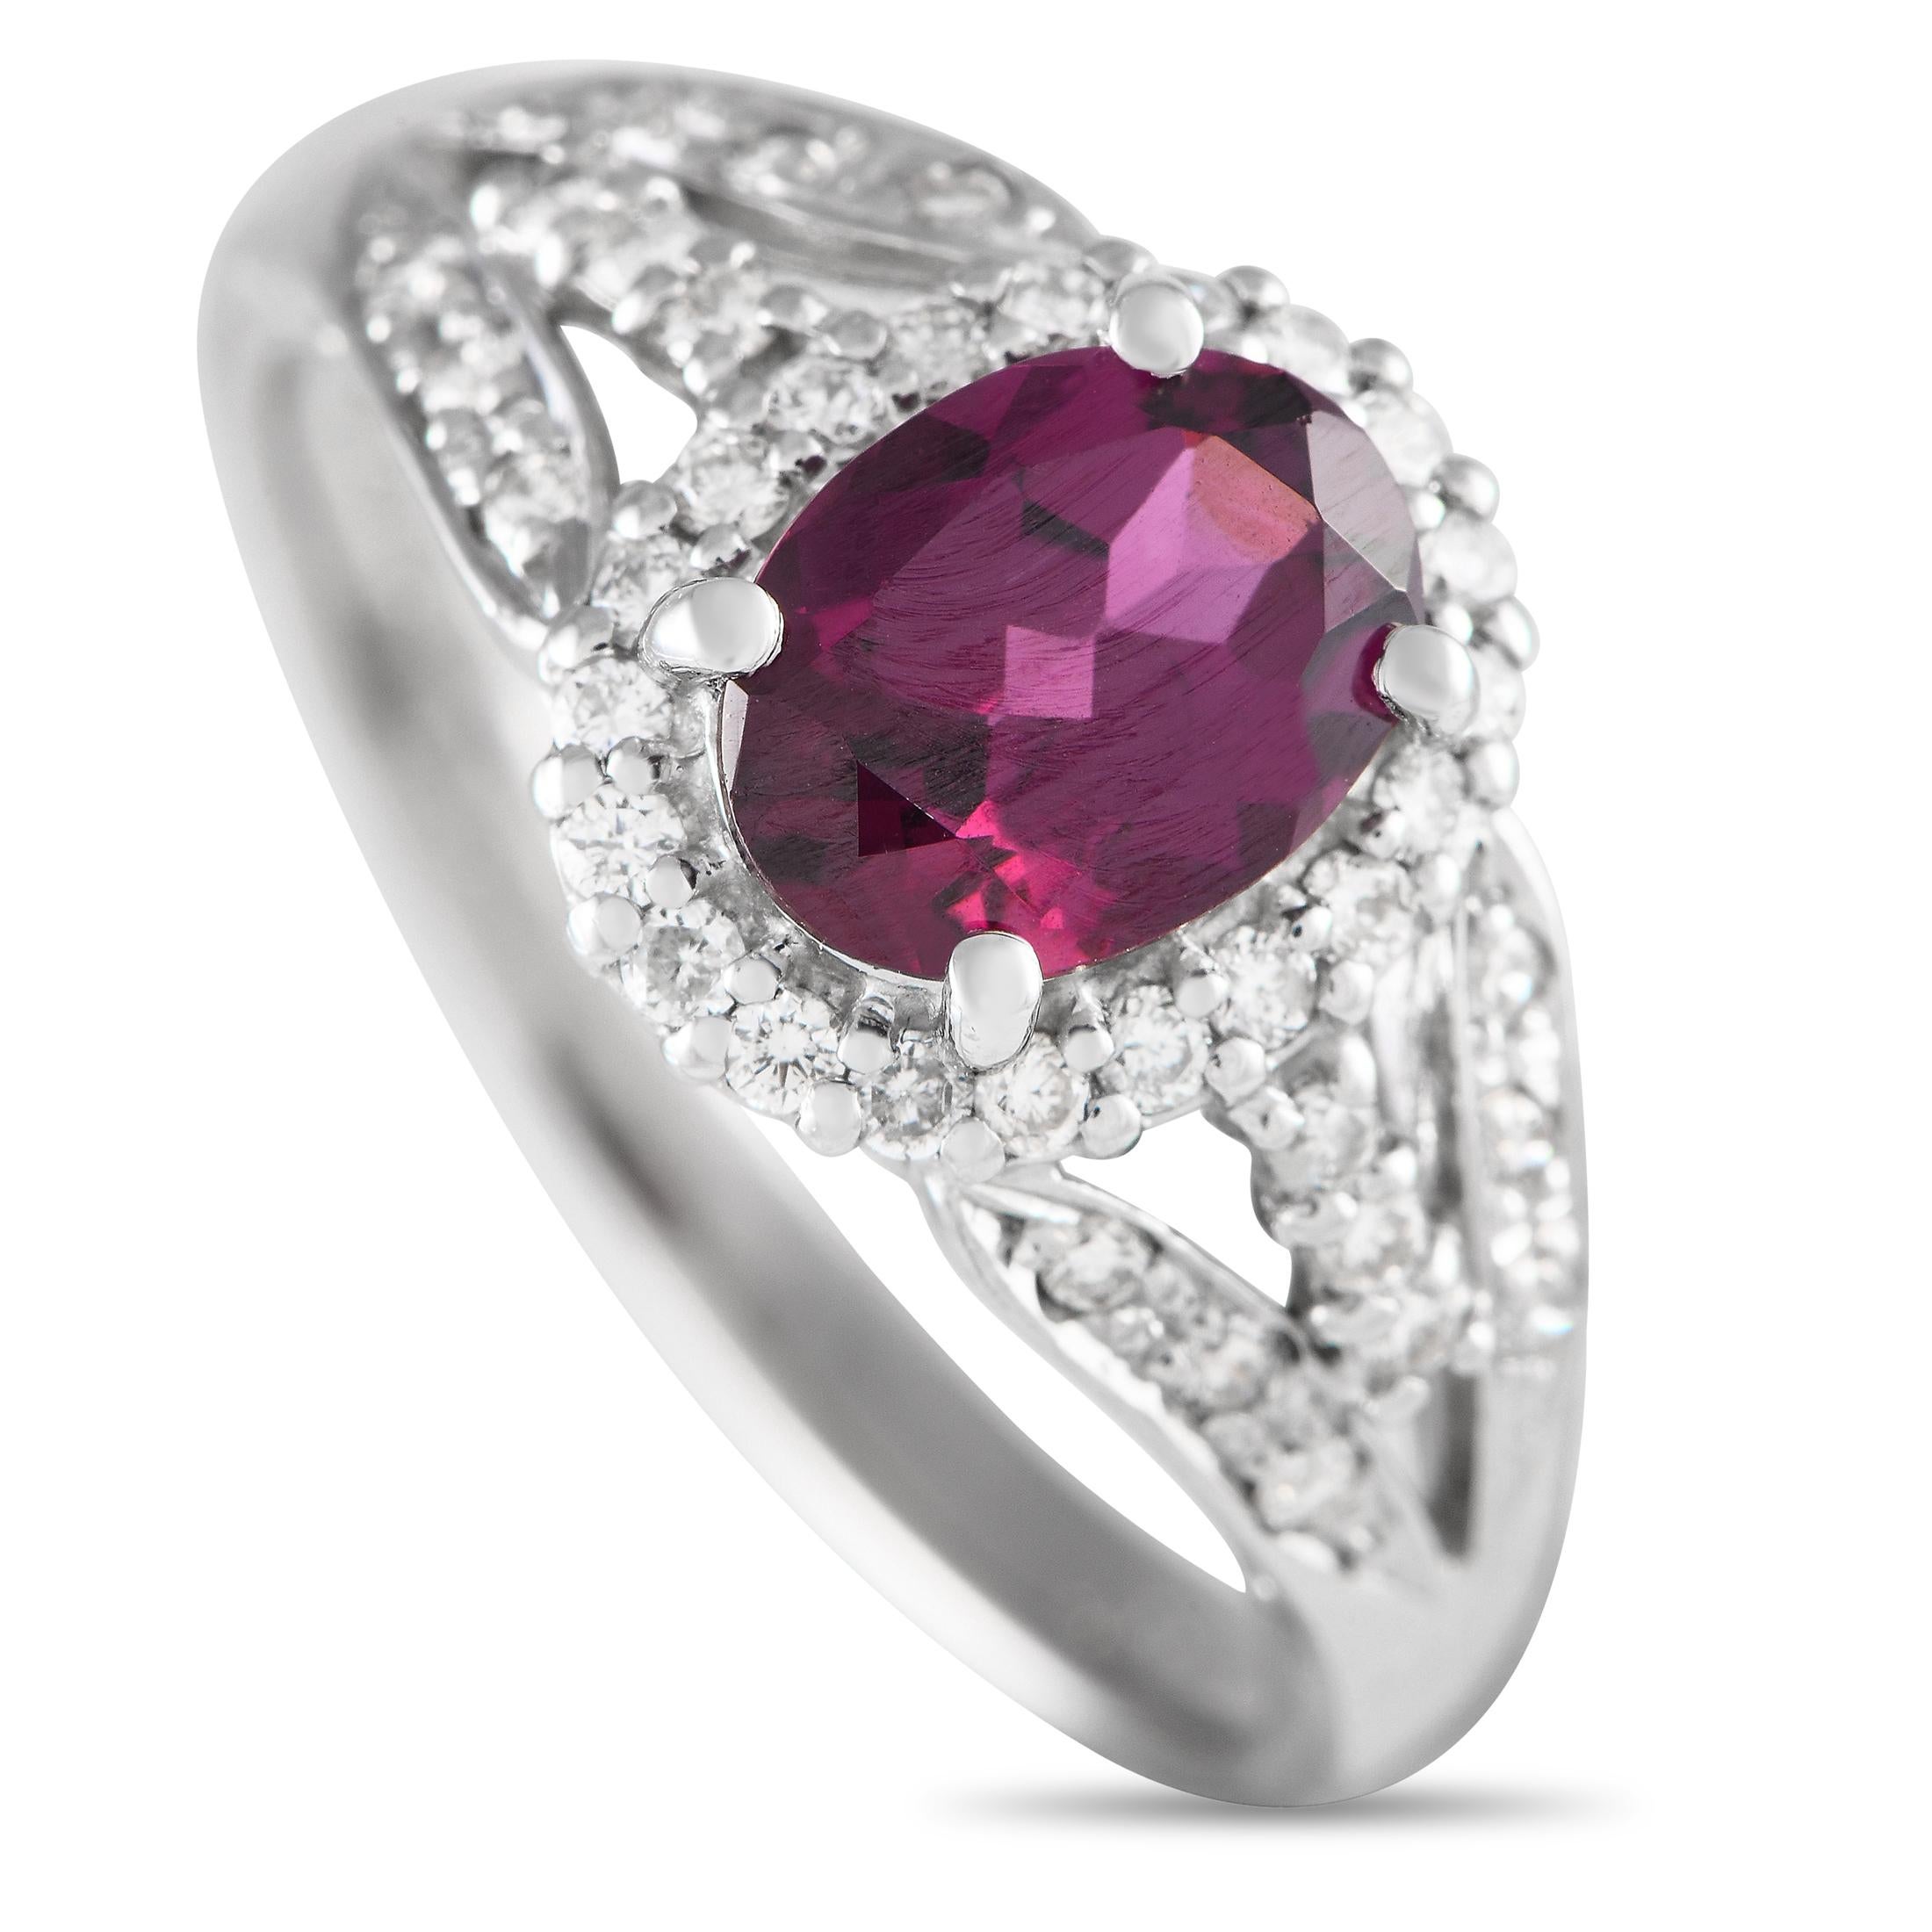 18K White Gold 0.35ct Diamond and Rhodolite Garnet Ring In Excellent Condition For Sale In Southampton, PA